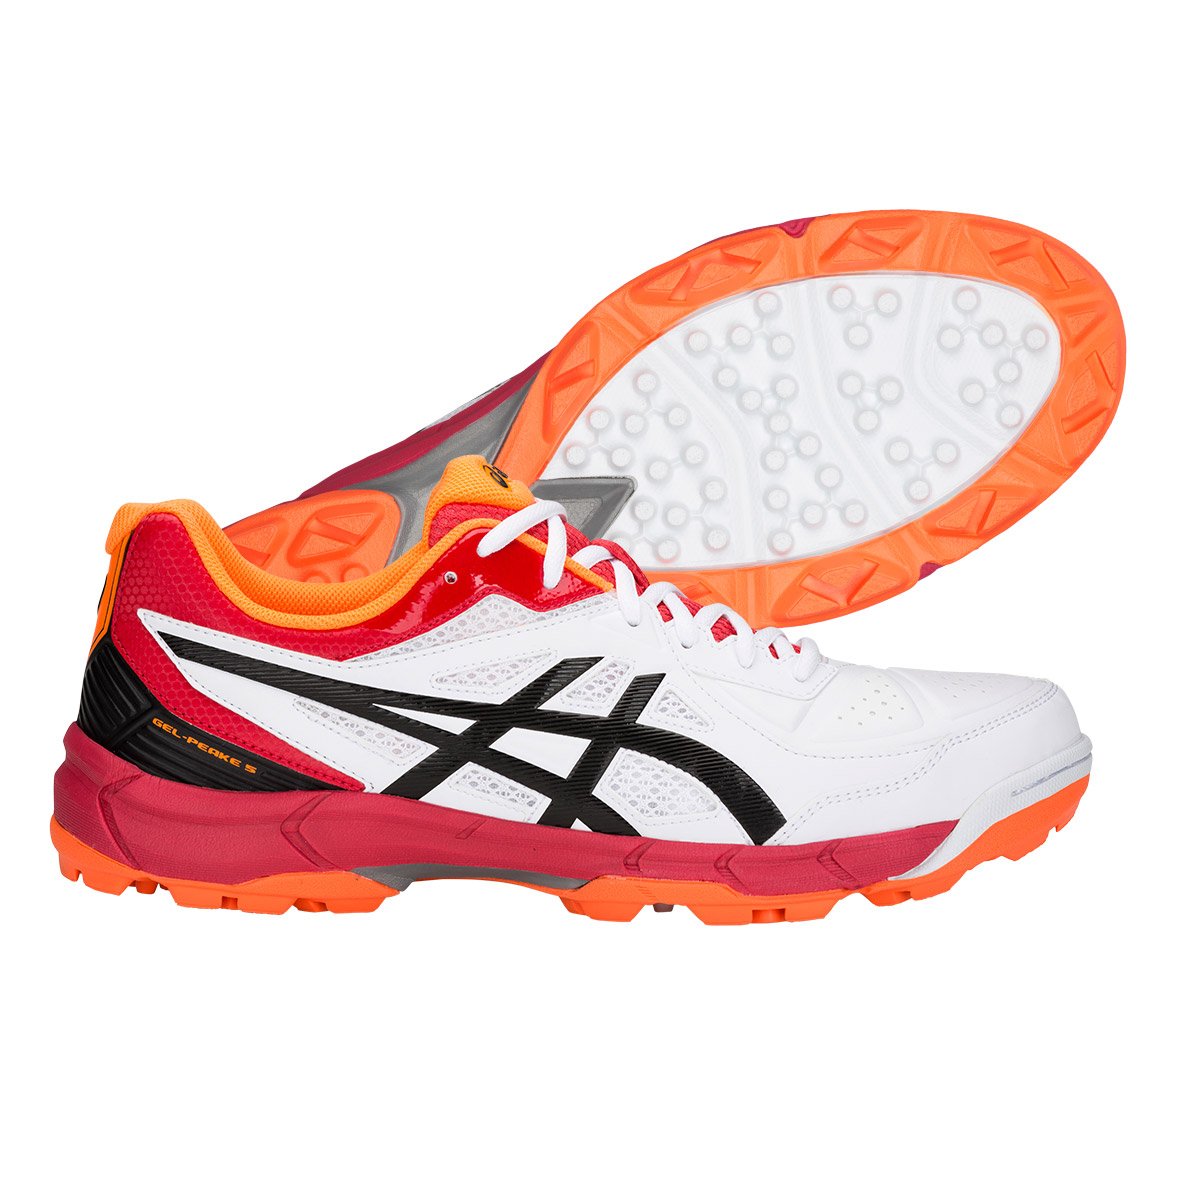 asics rubber spikes shoes